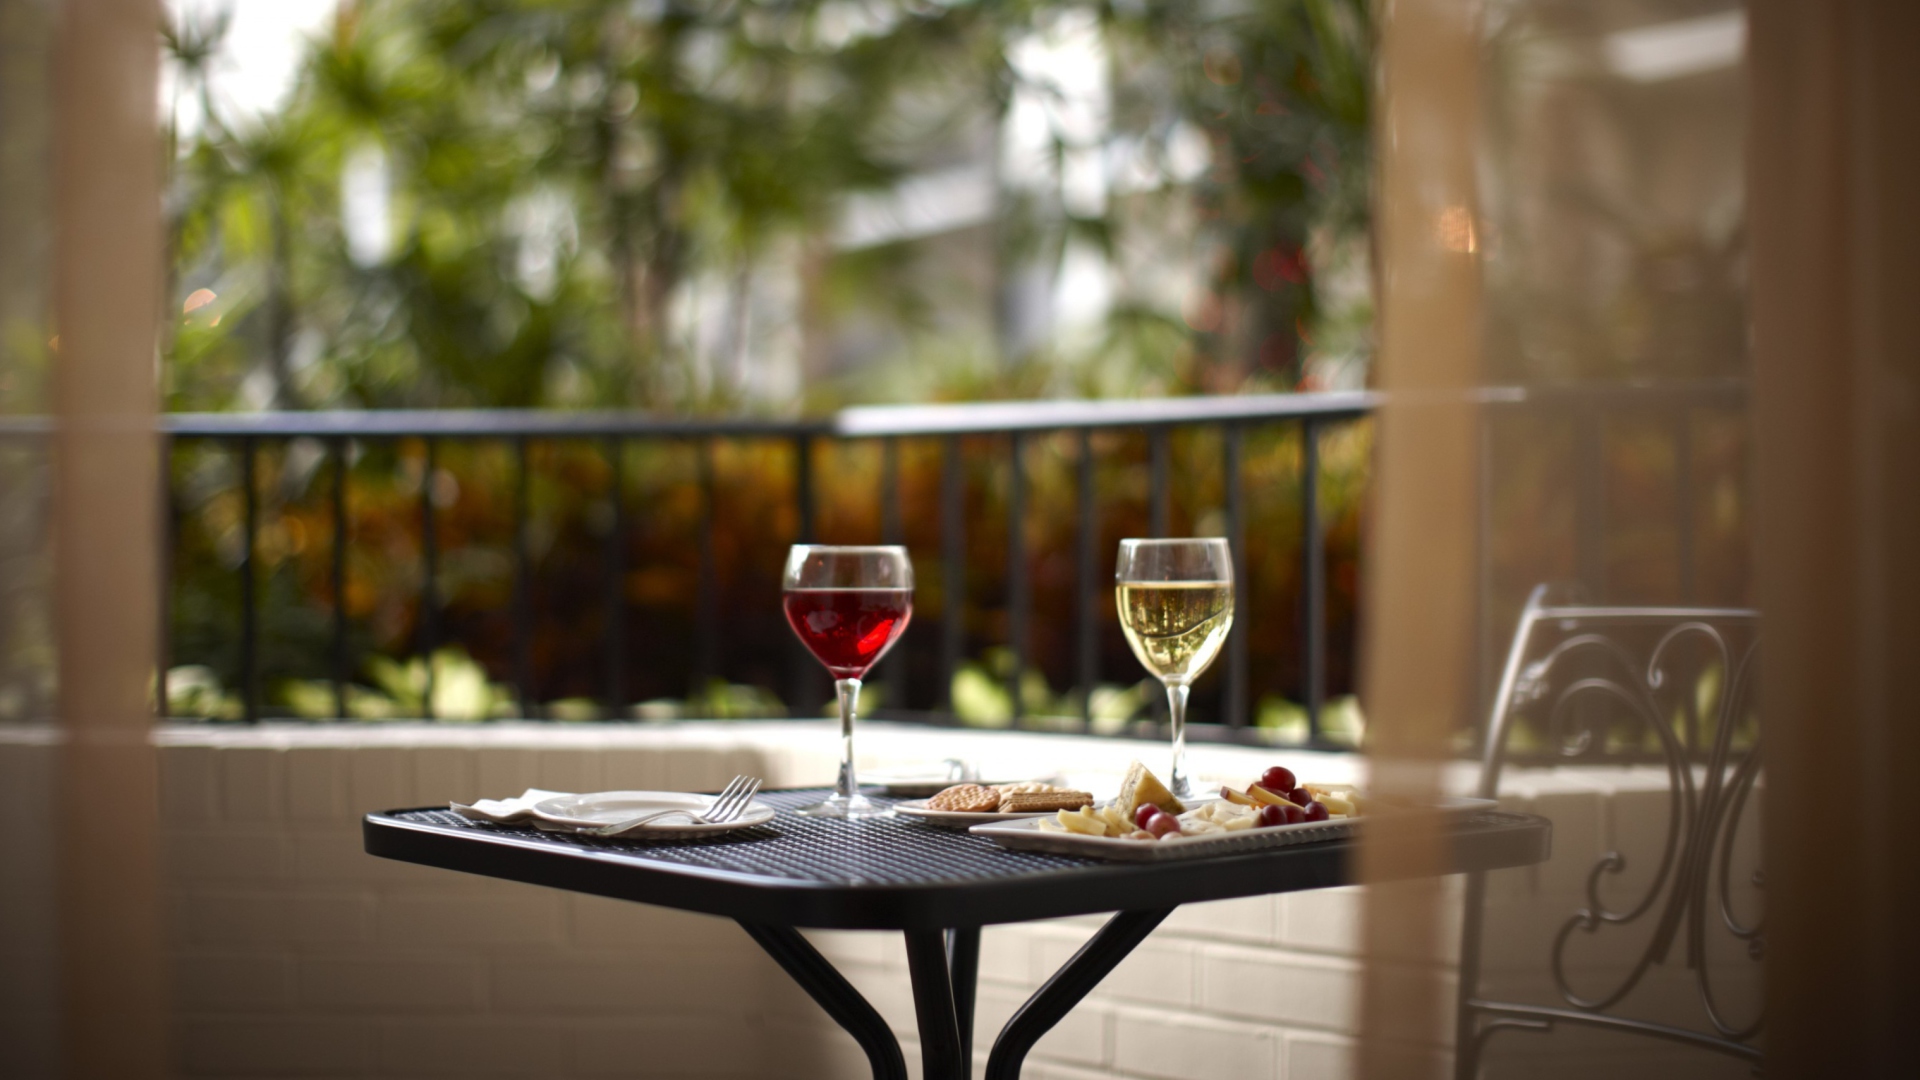 Lunch With Wine On Terrace wallpaper 1920x1080